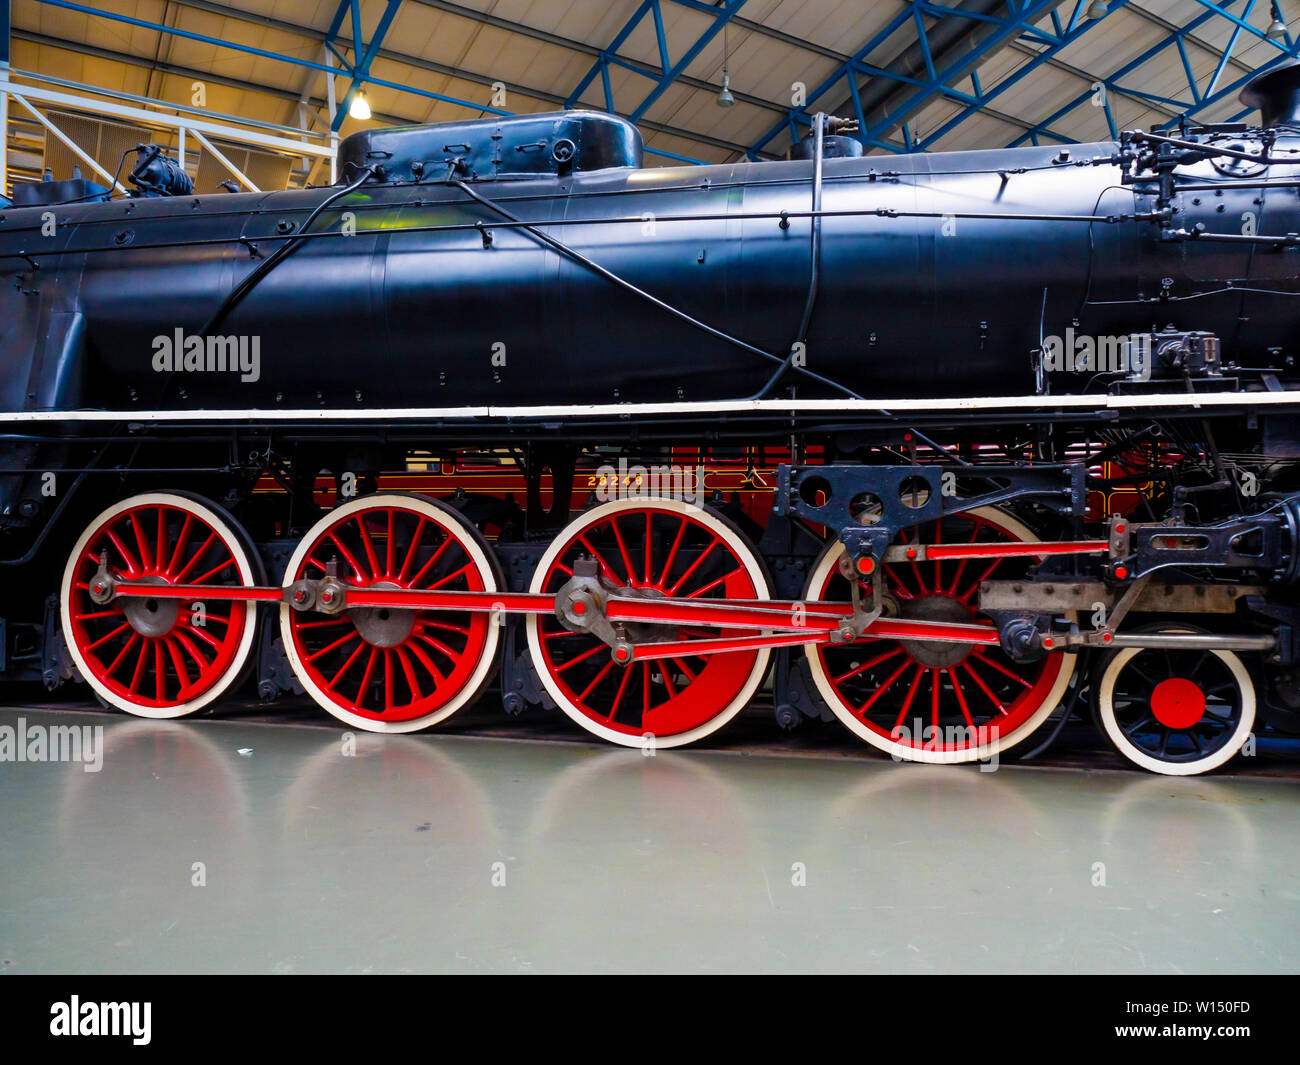 A 4-8-4 passenger steam locomotive from Chinese Railways built by Vulcan Foundry detail showing red driving wheels and valve gear Stock Photo